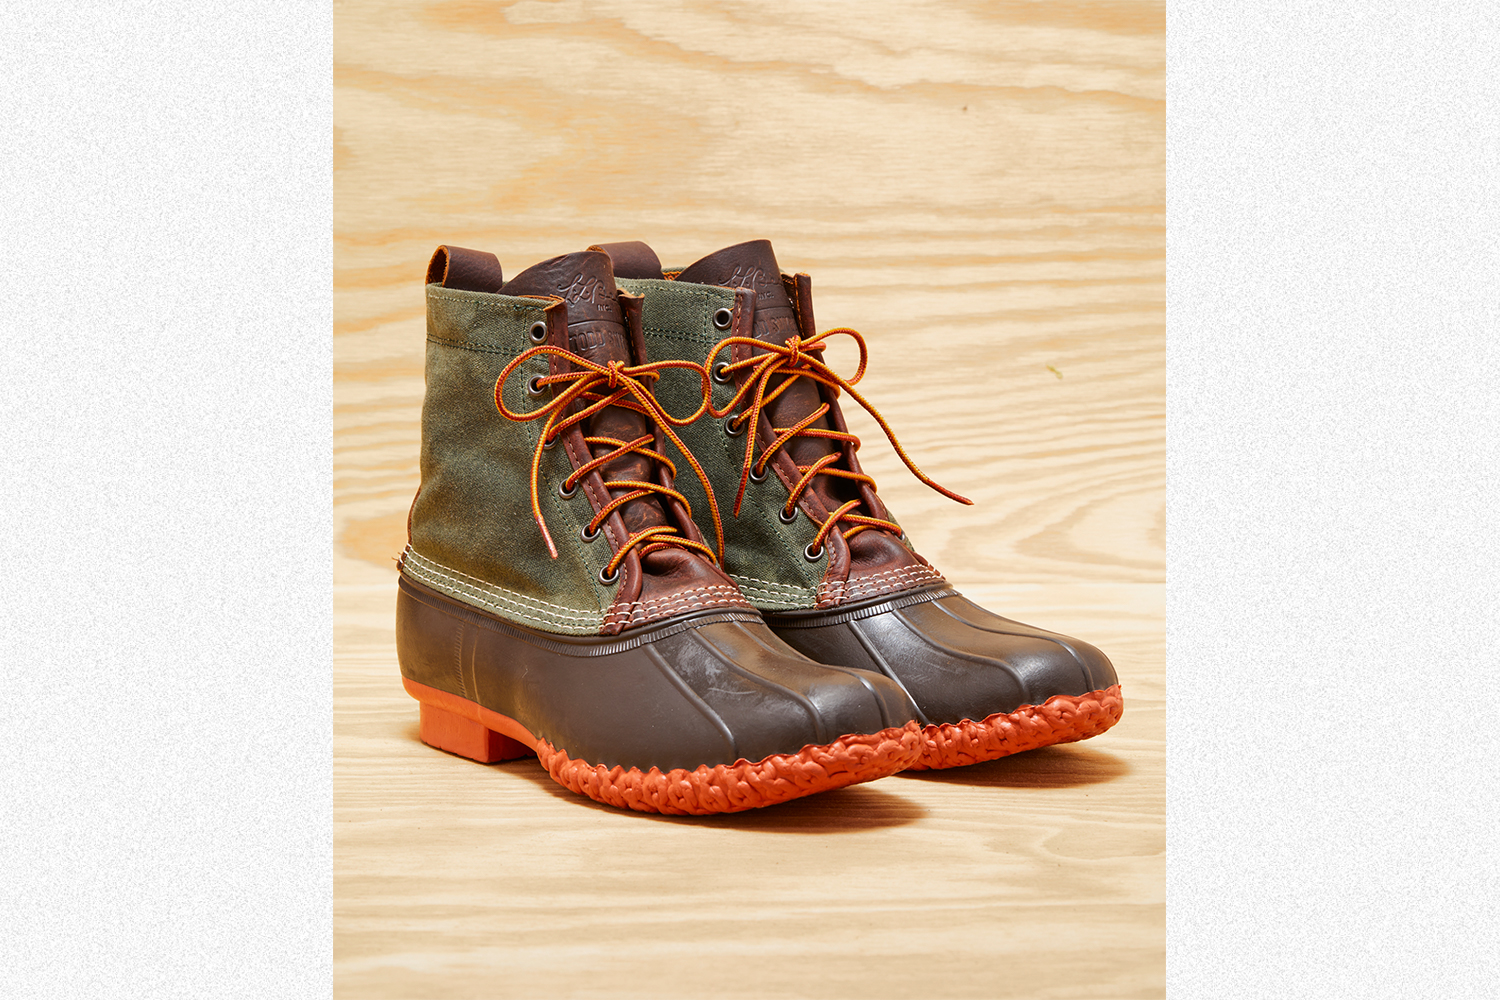 Todd Snyder x L.L.Bean Waxed Canvas Bean Boot in Olive